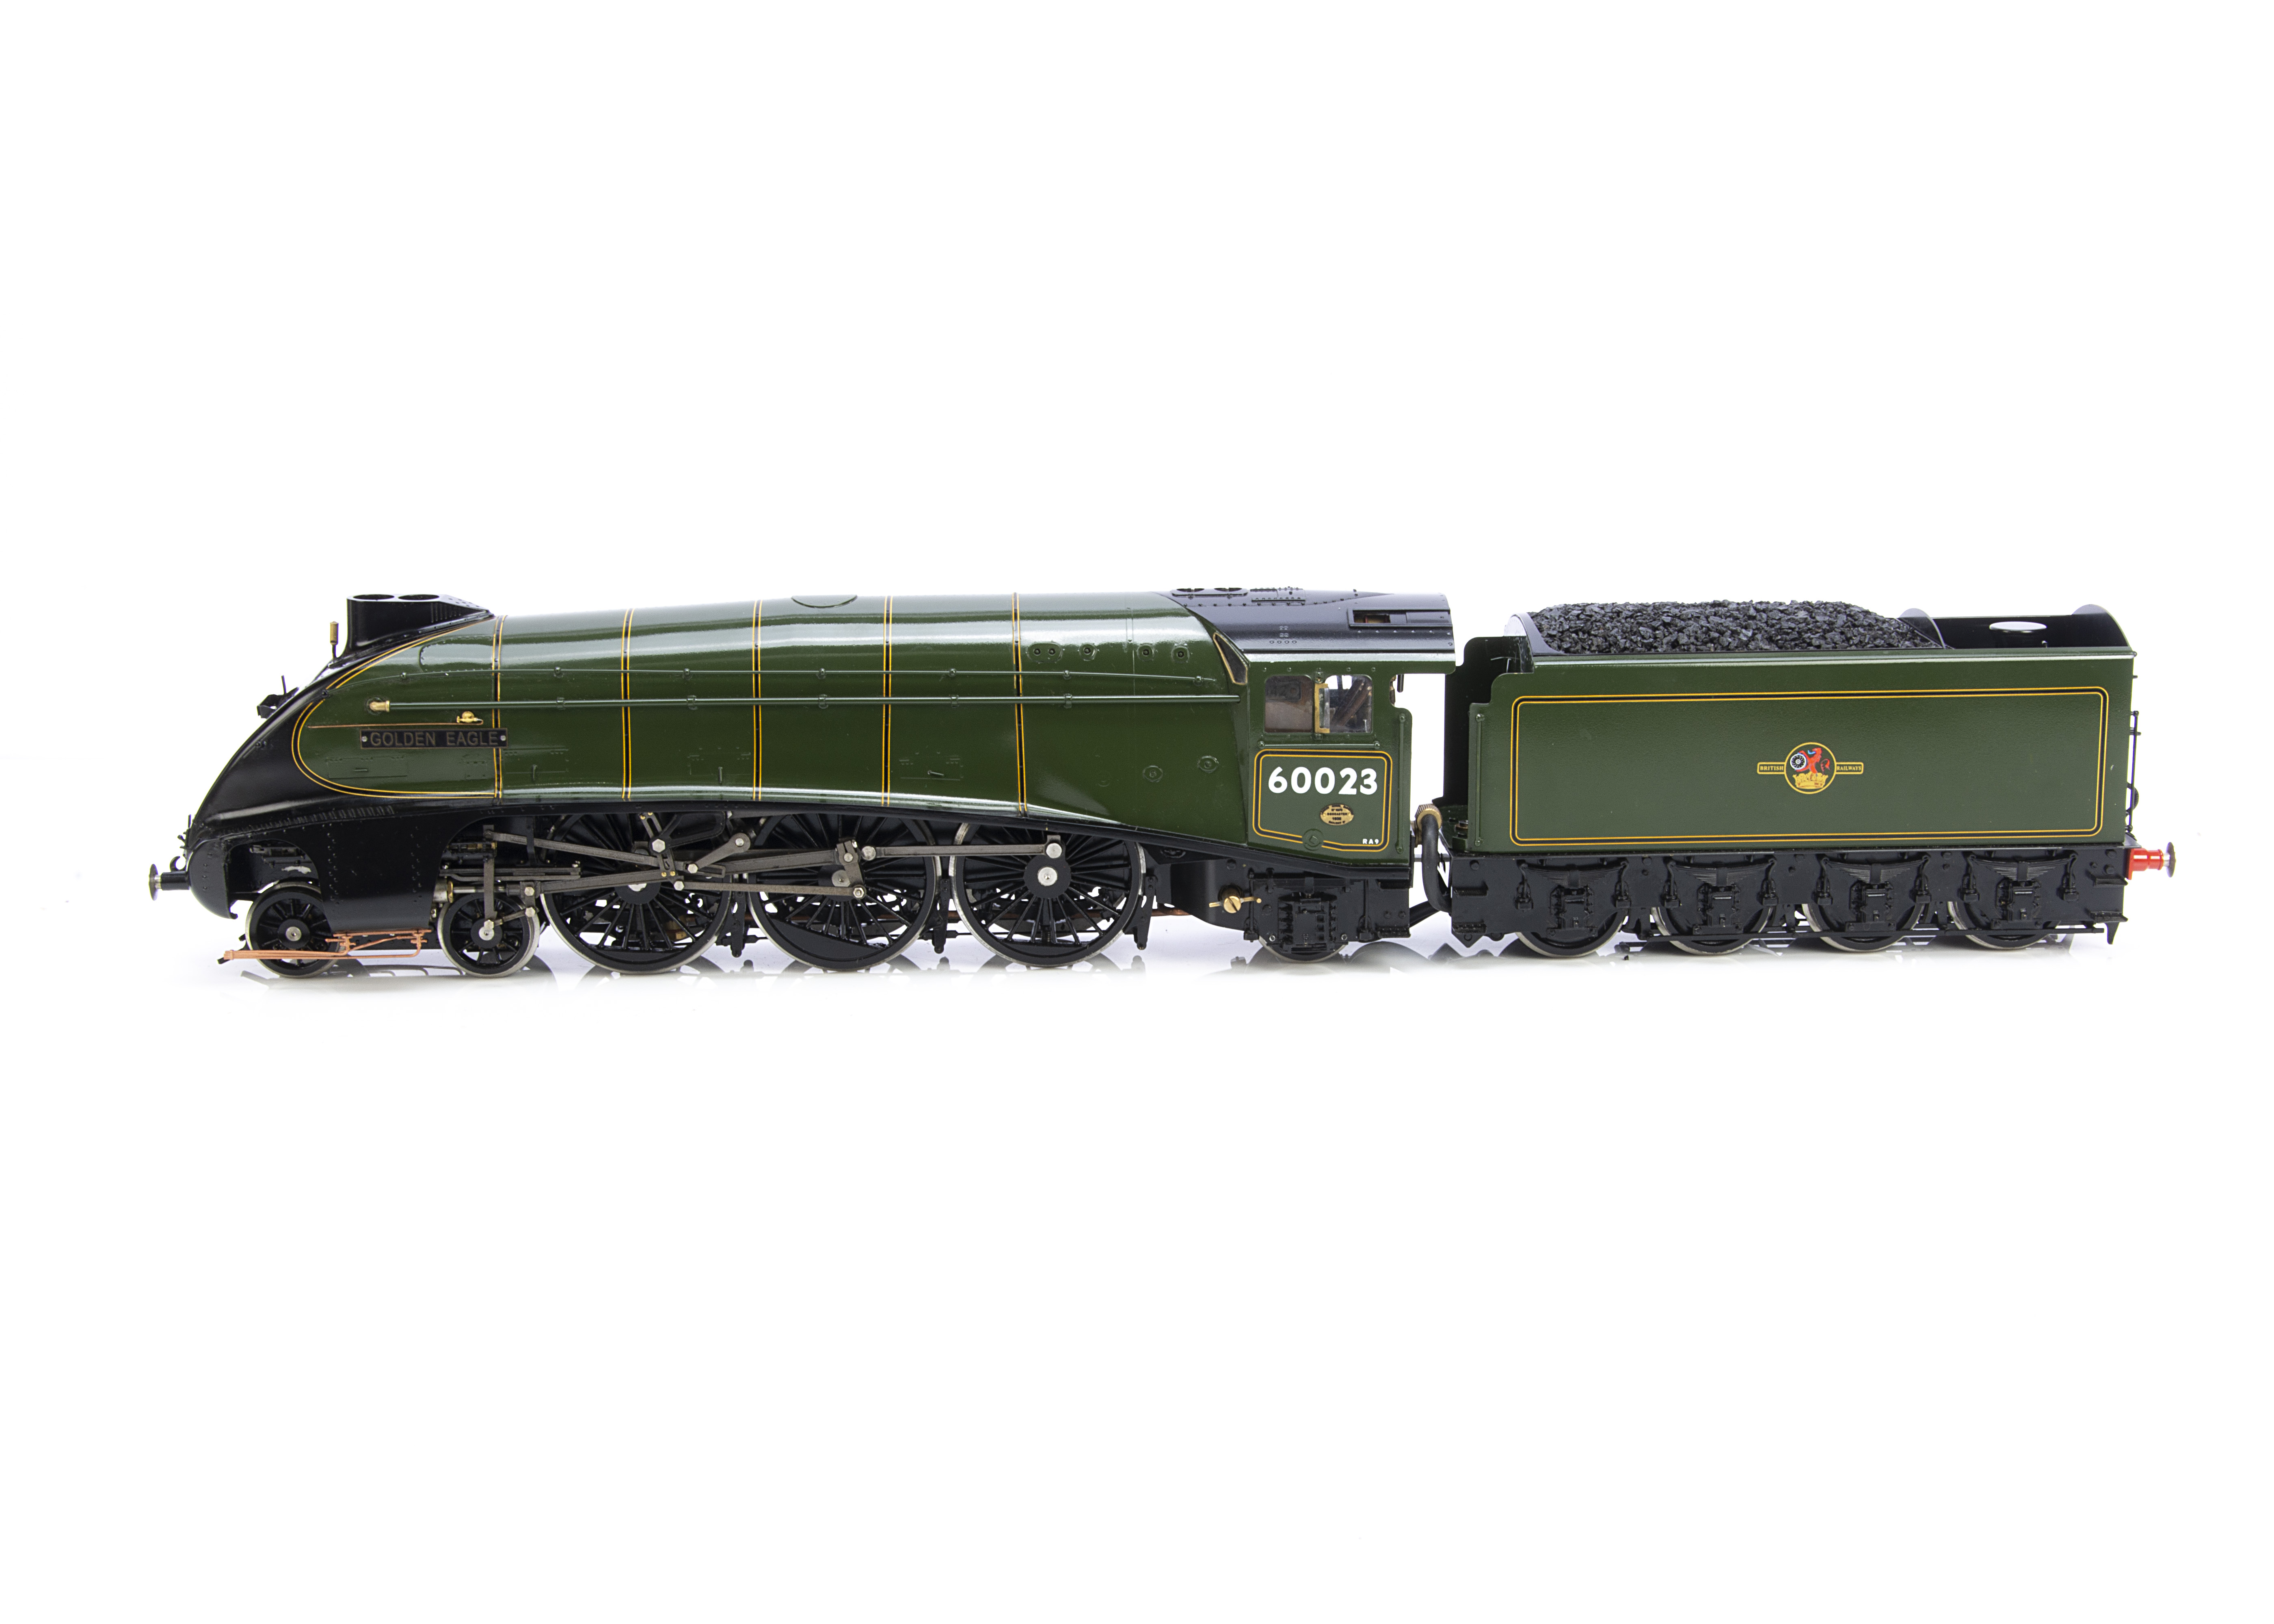 A Gauge 1 gas-fired live steam BR ex-LNER 'A4' class 4-6-2 Locomotive and Tender by Bowande, in